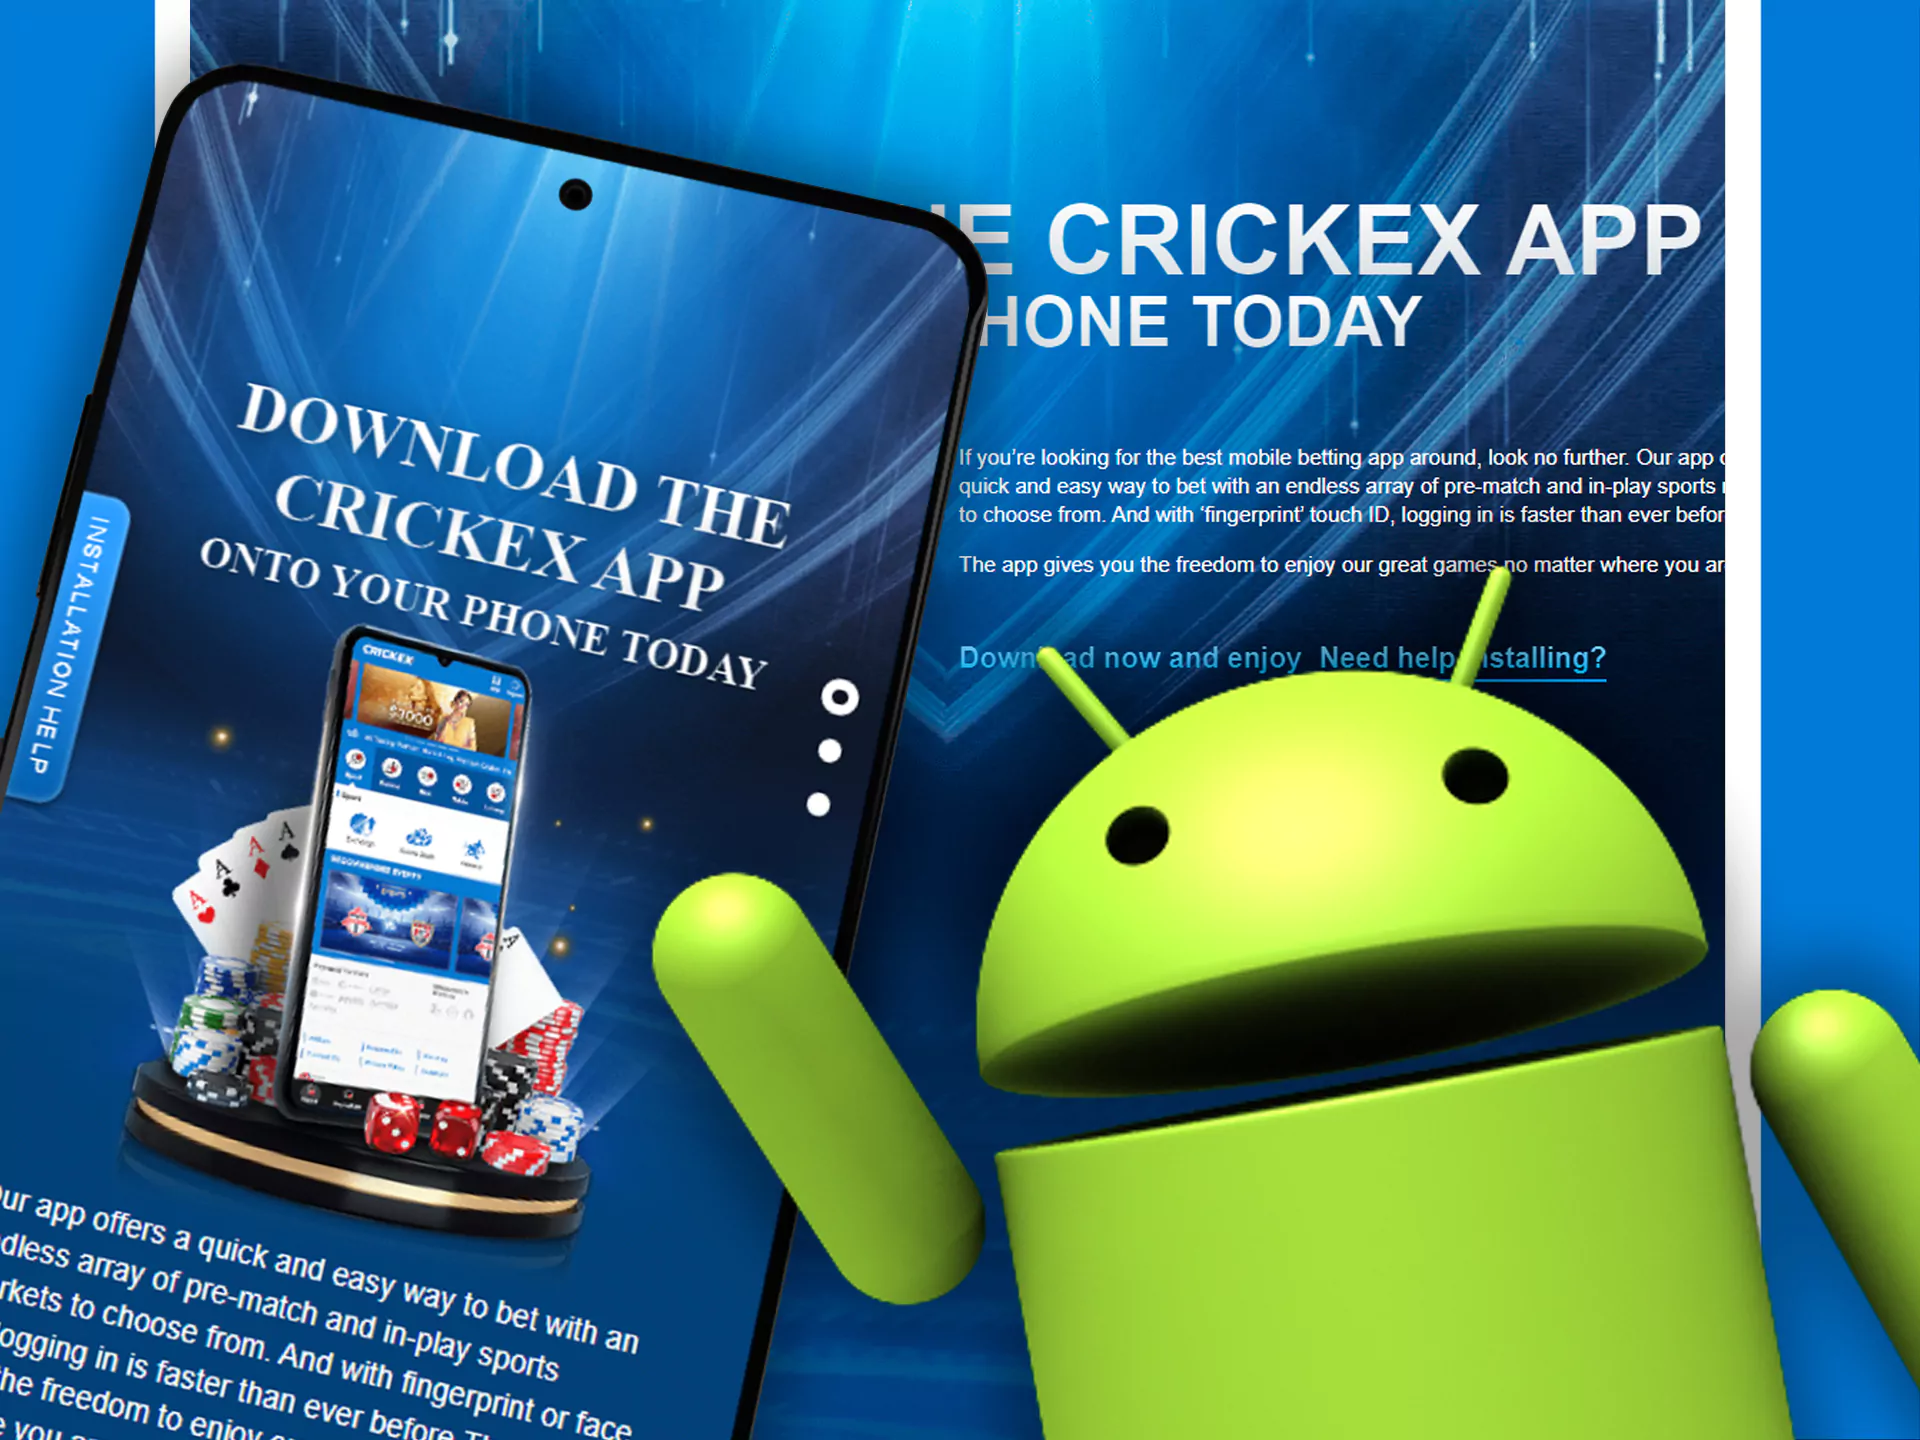 The Crickex app can be downloaded for free on Android.